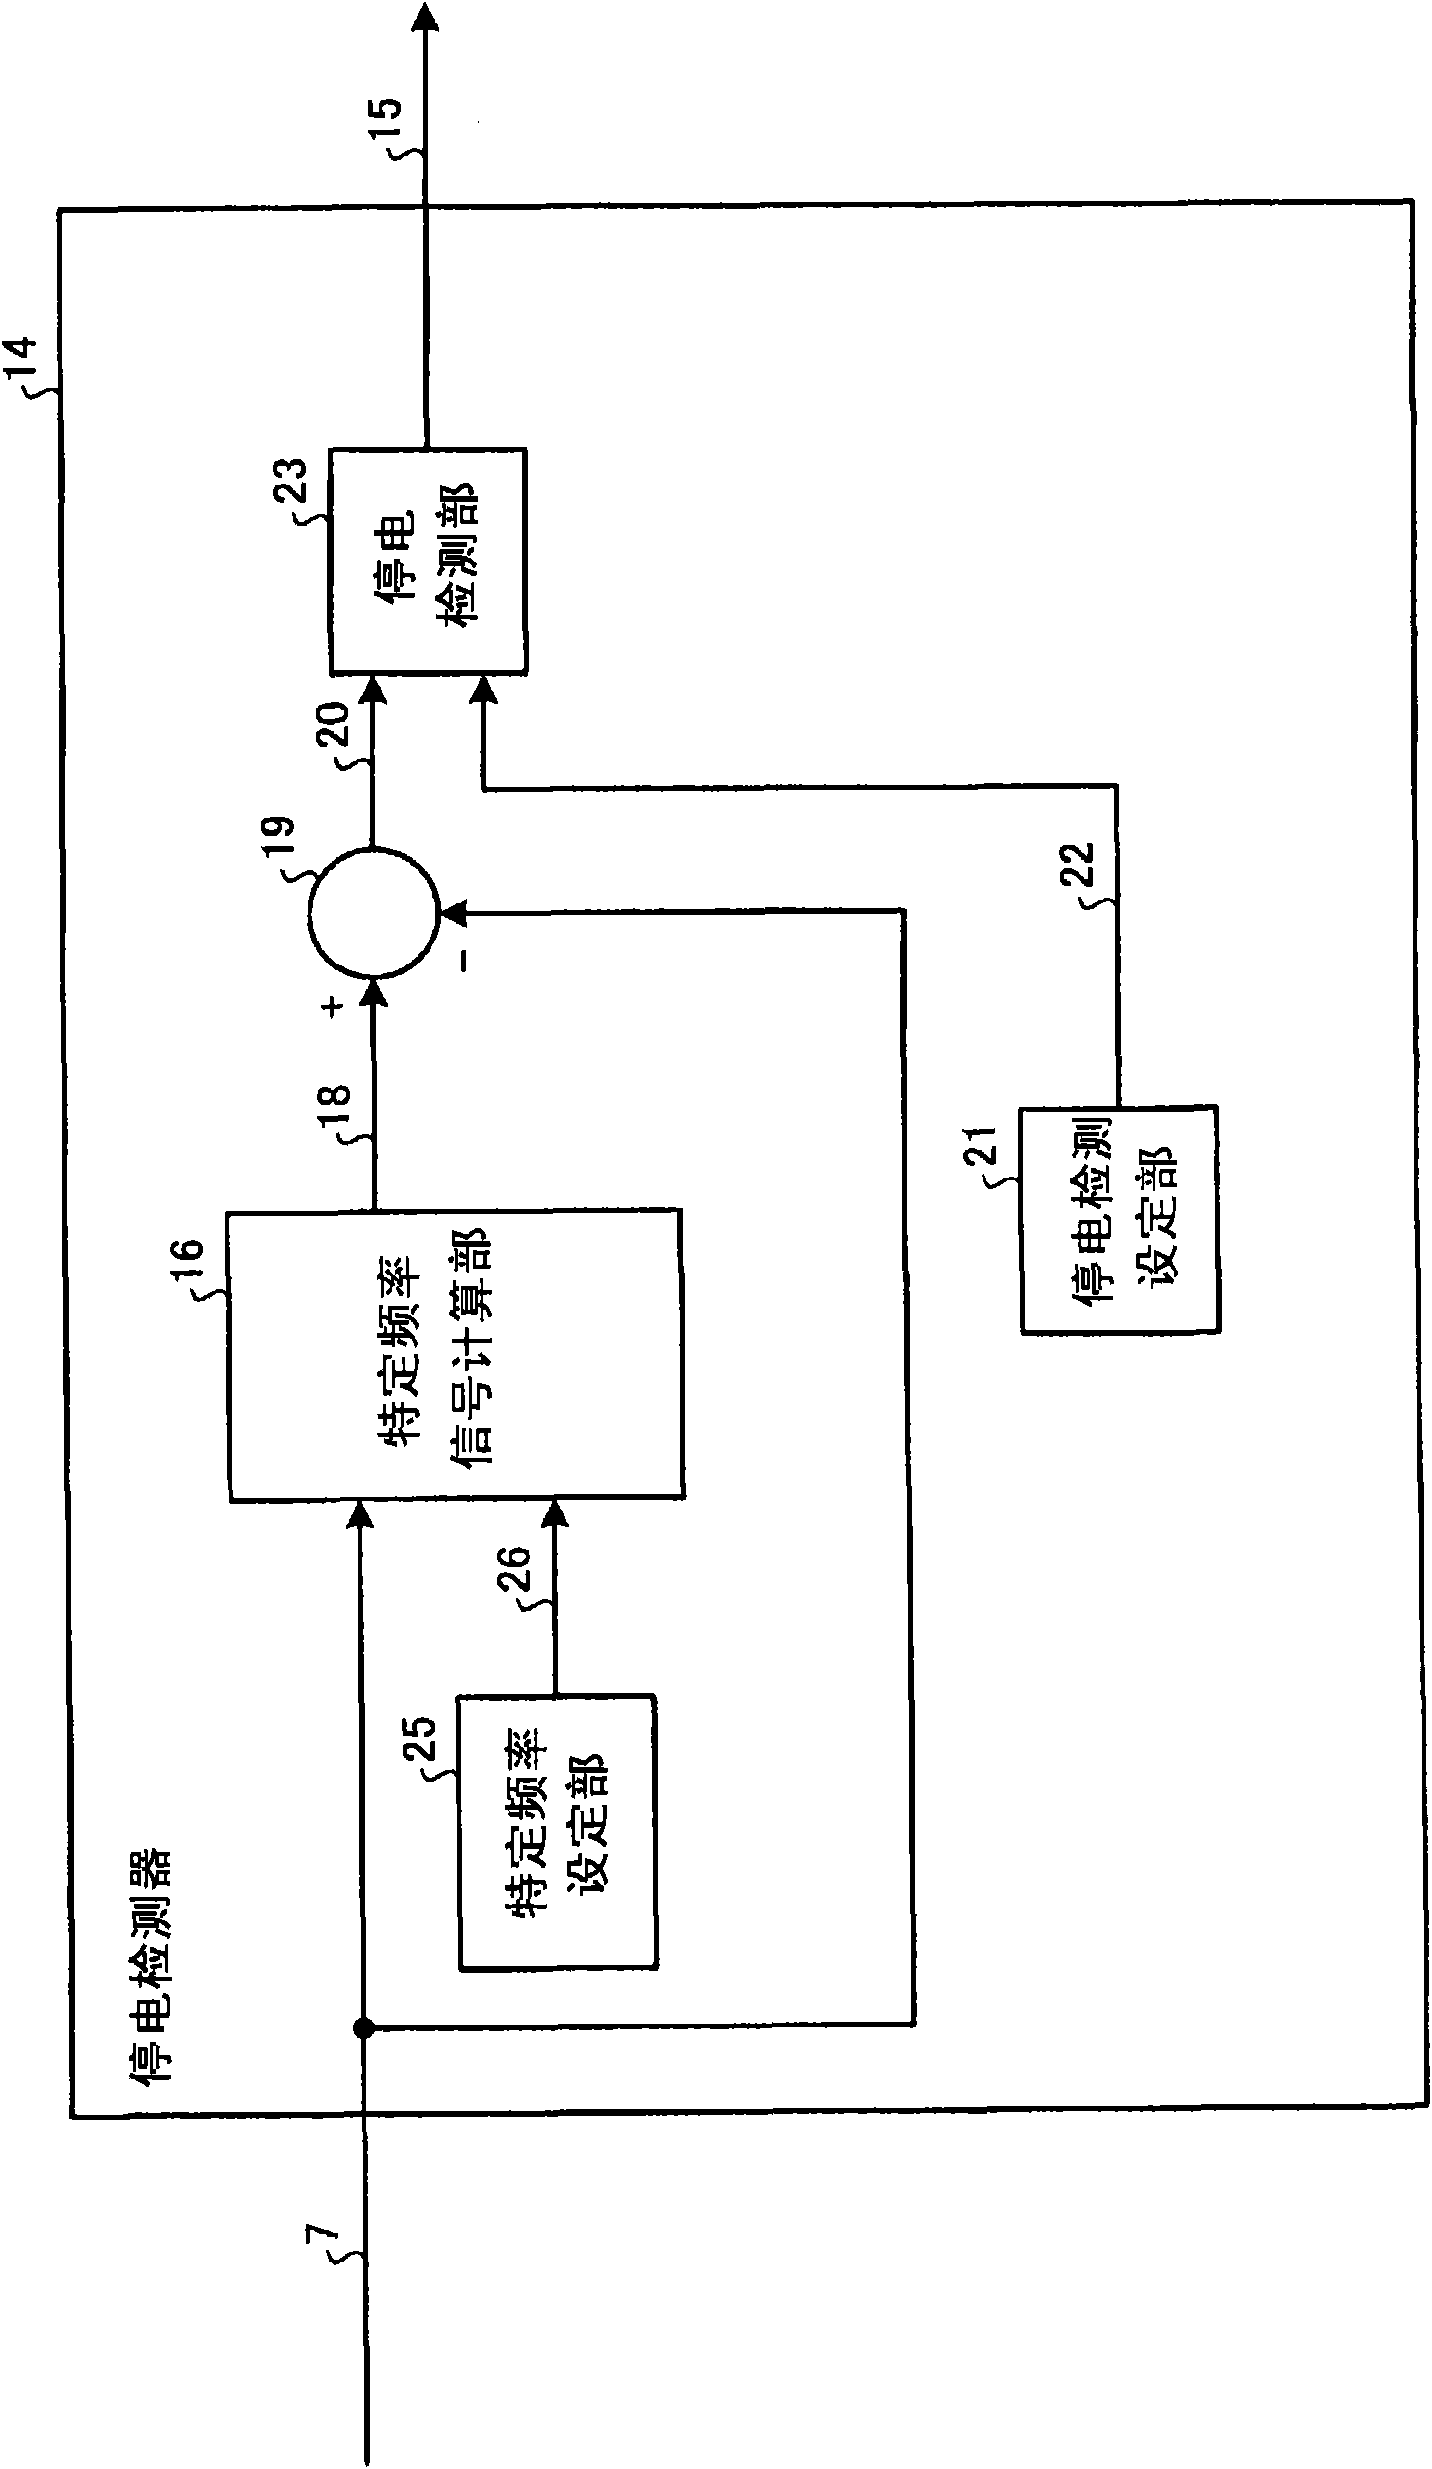 Controller for AC electric train